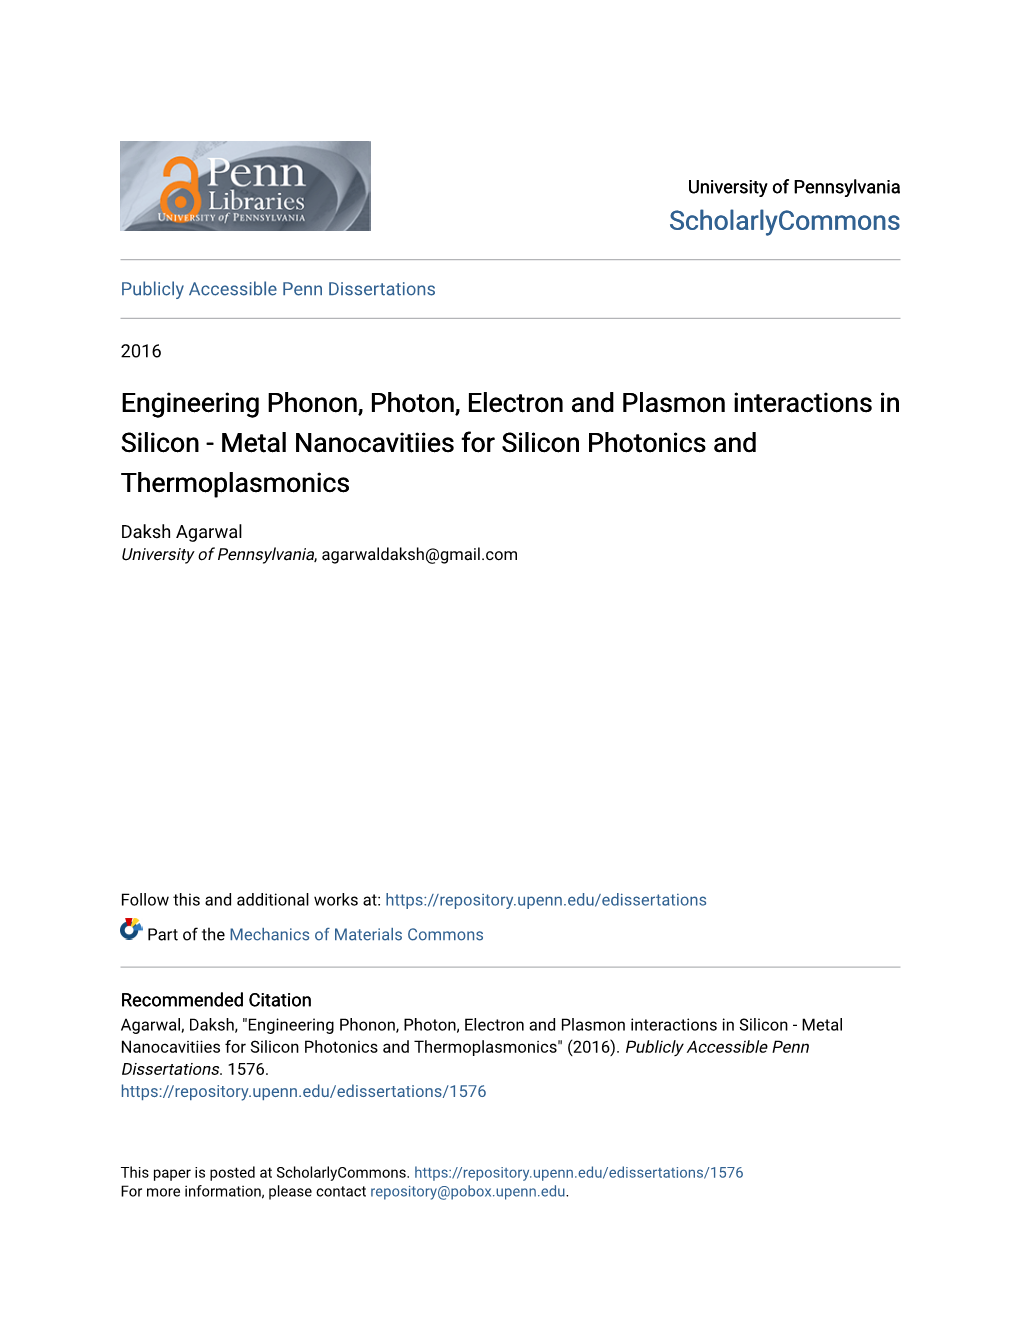 Engineering Phonon, Photon, Electron and Plasmon Interactions in Silicon - Metal Nanocavitiies for Silicon Photonics and Thermoplasmonics